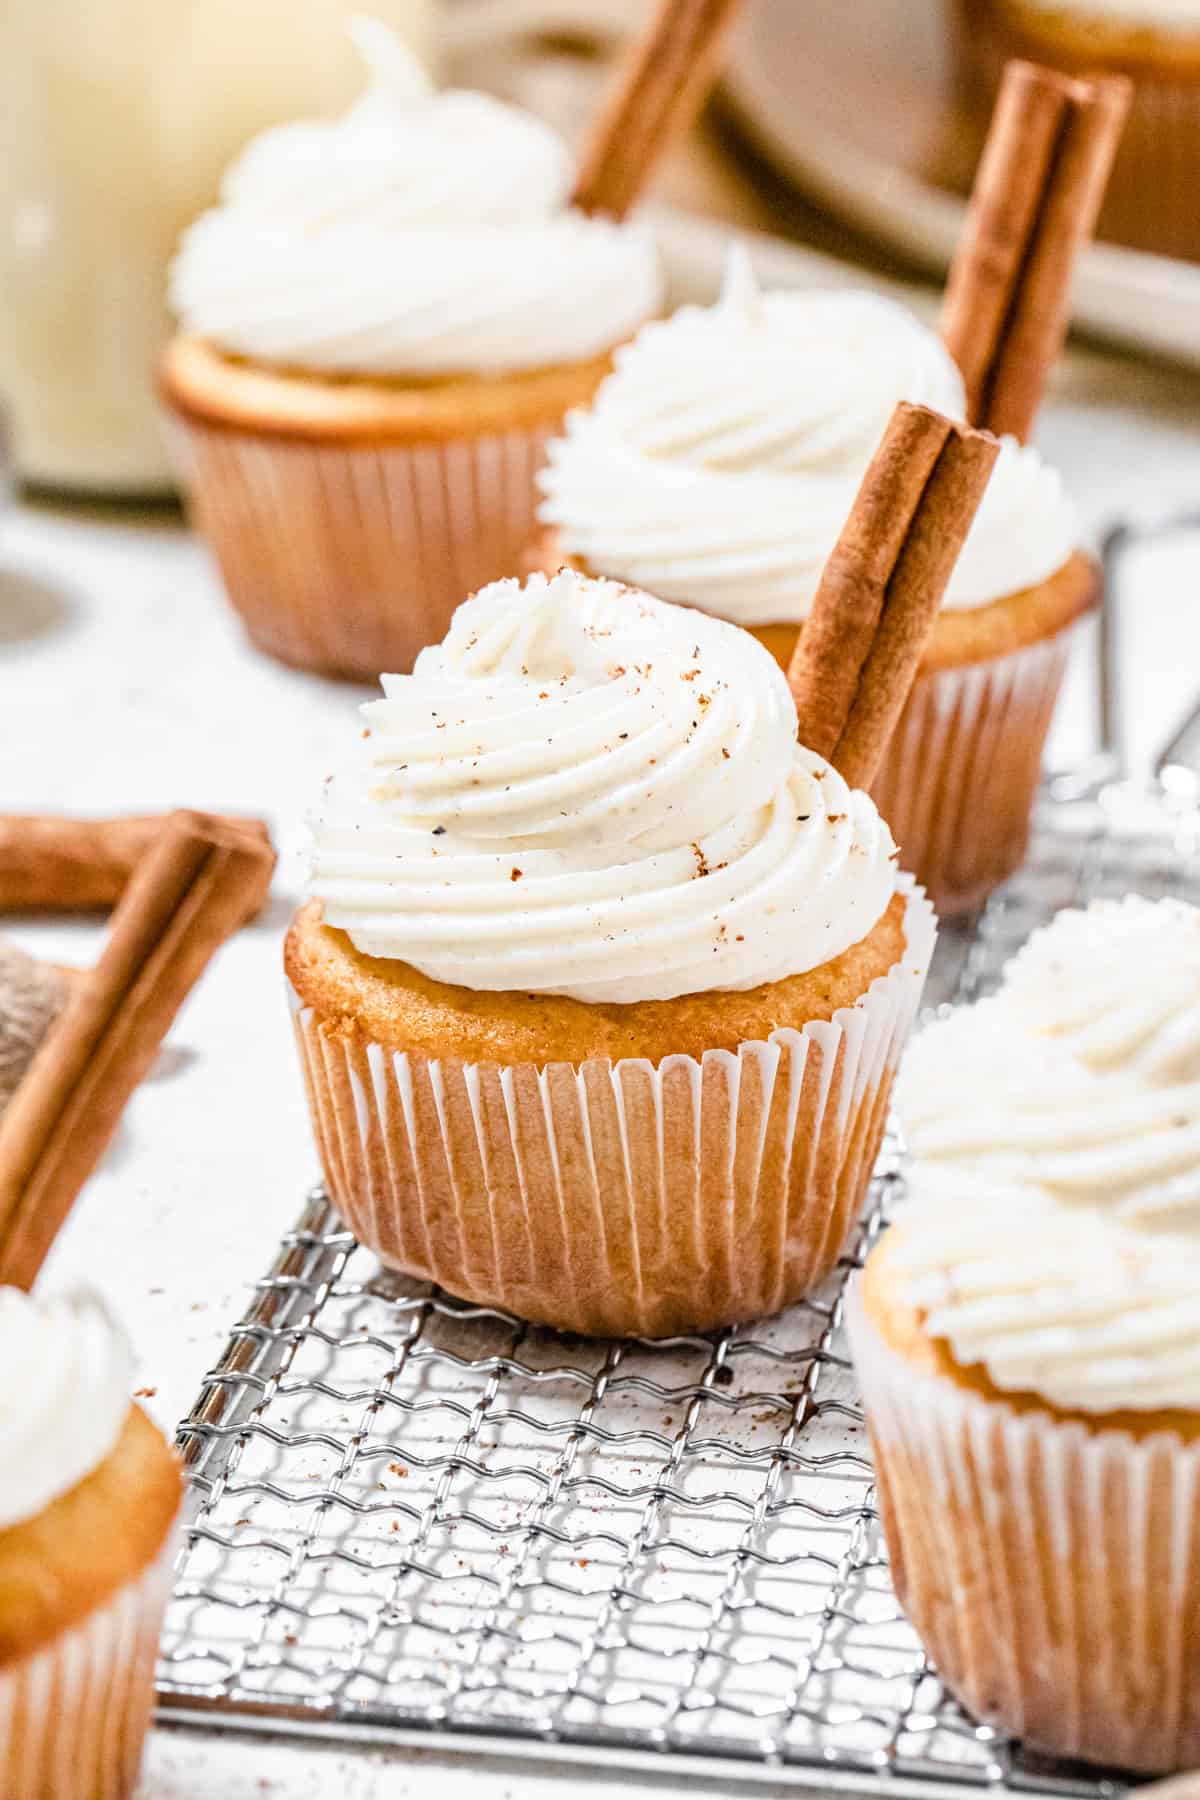 cupcakes on a safety grater with cinnamon sticks on top of them